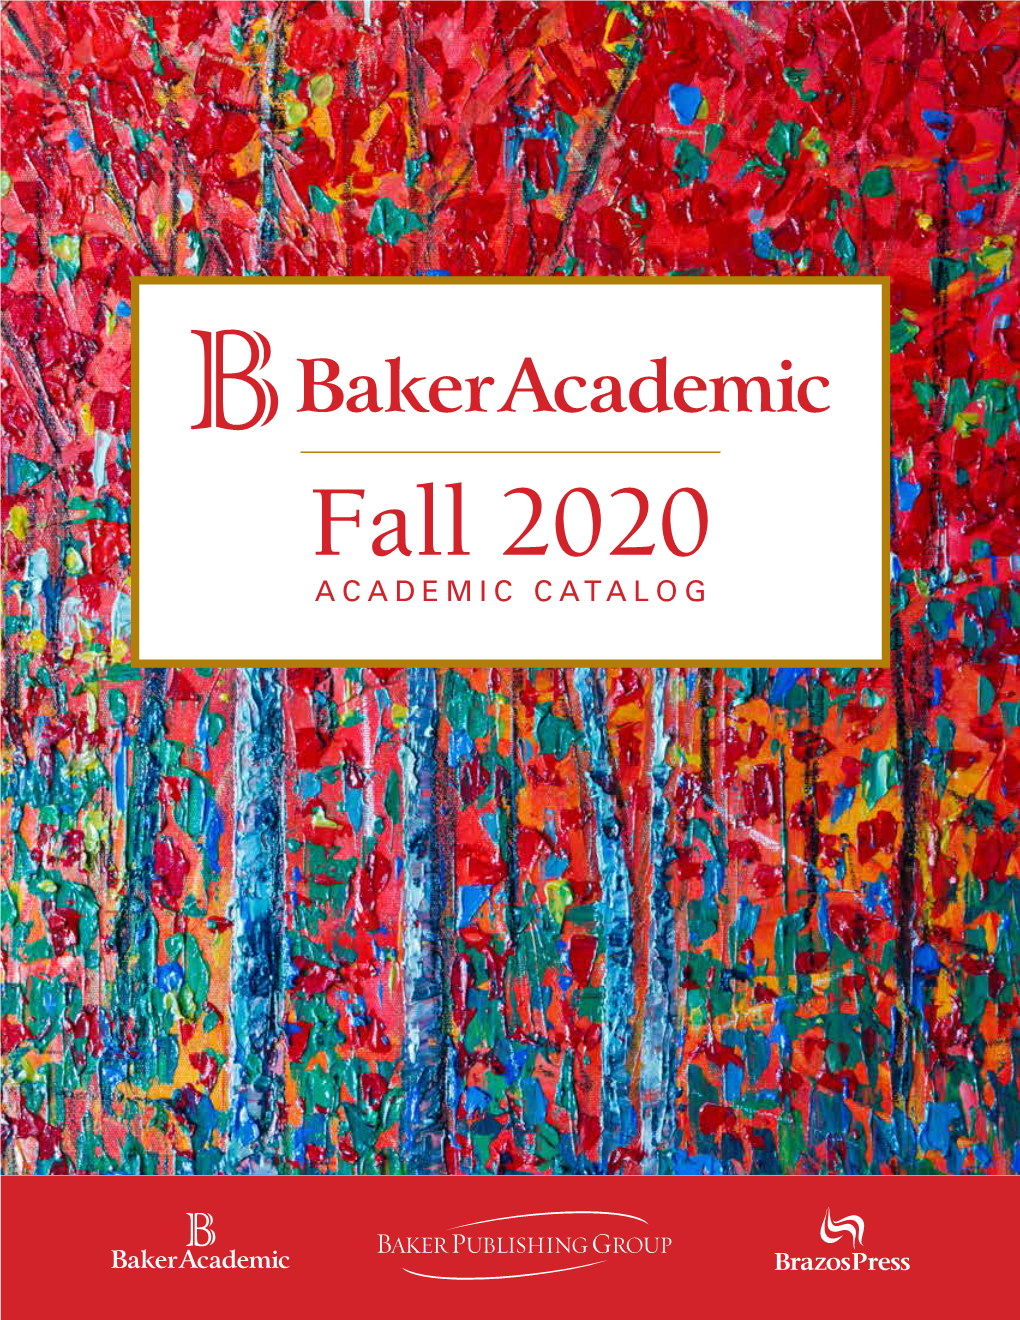 Fall 2020 ACADEMIC CATALOG Professors! Are You Interested in Using One of Our Titles As a Textbook for Your Class? We Now Offer FREE Exam Copies (US Only)